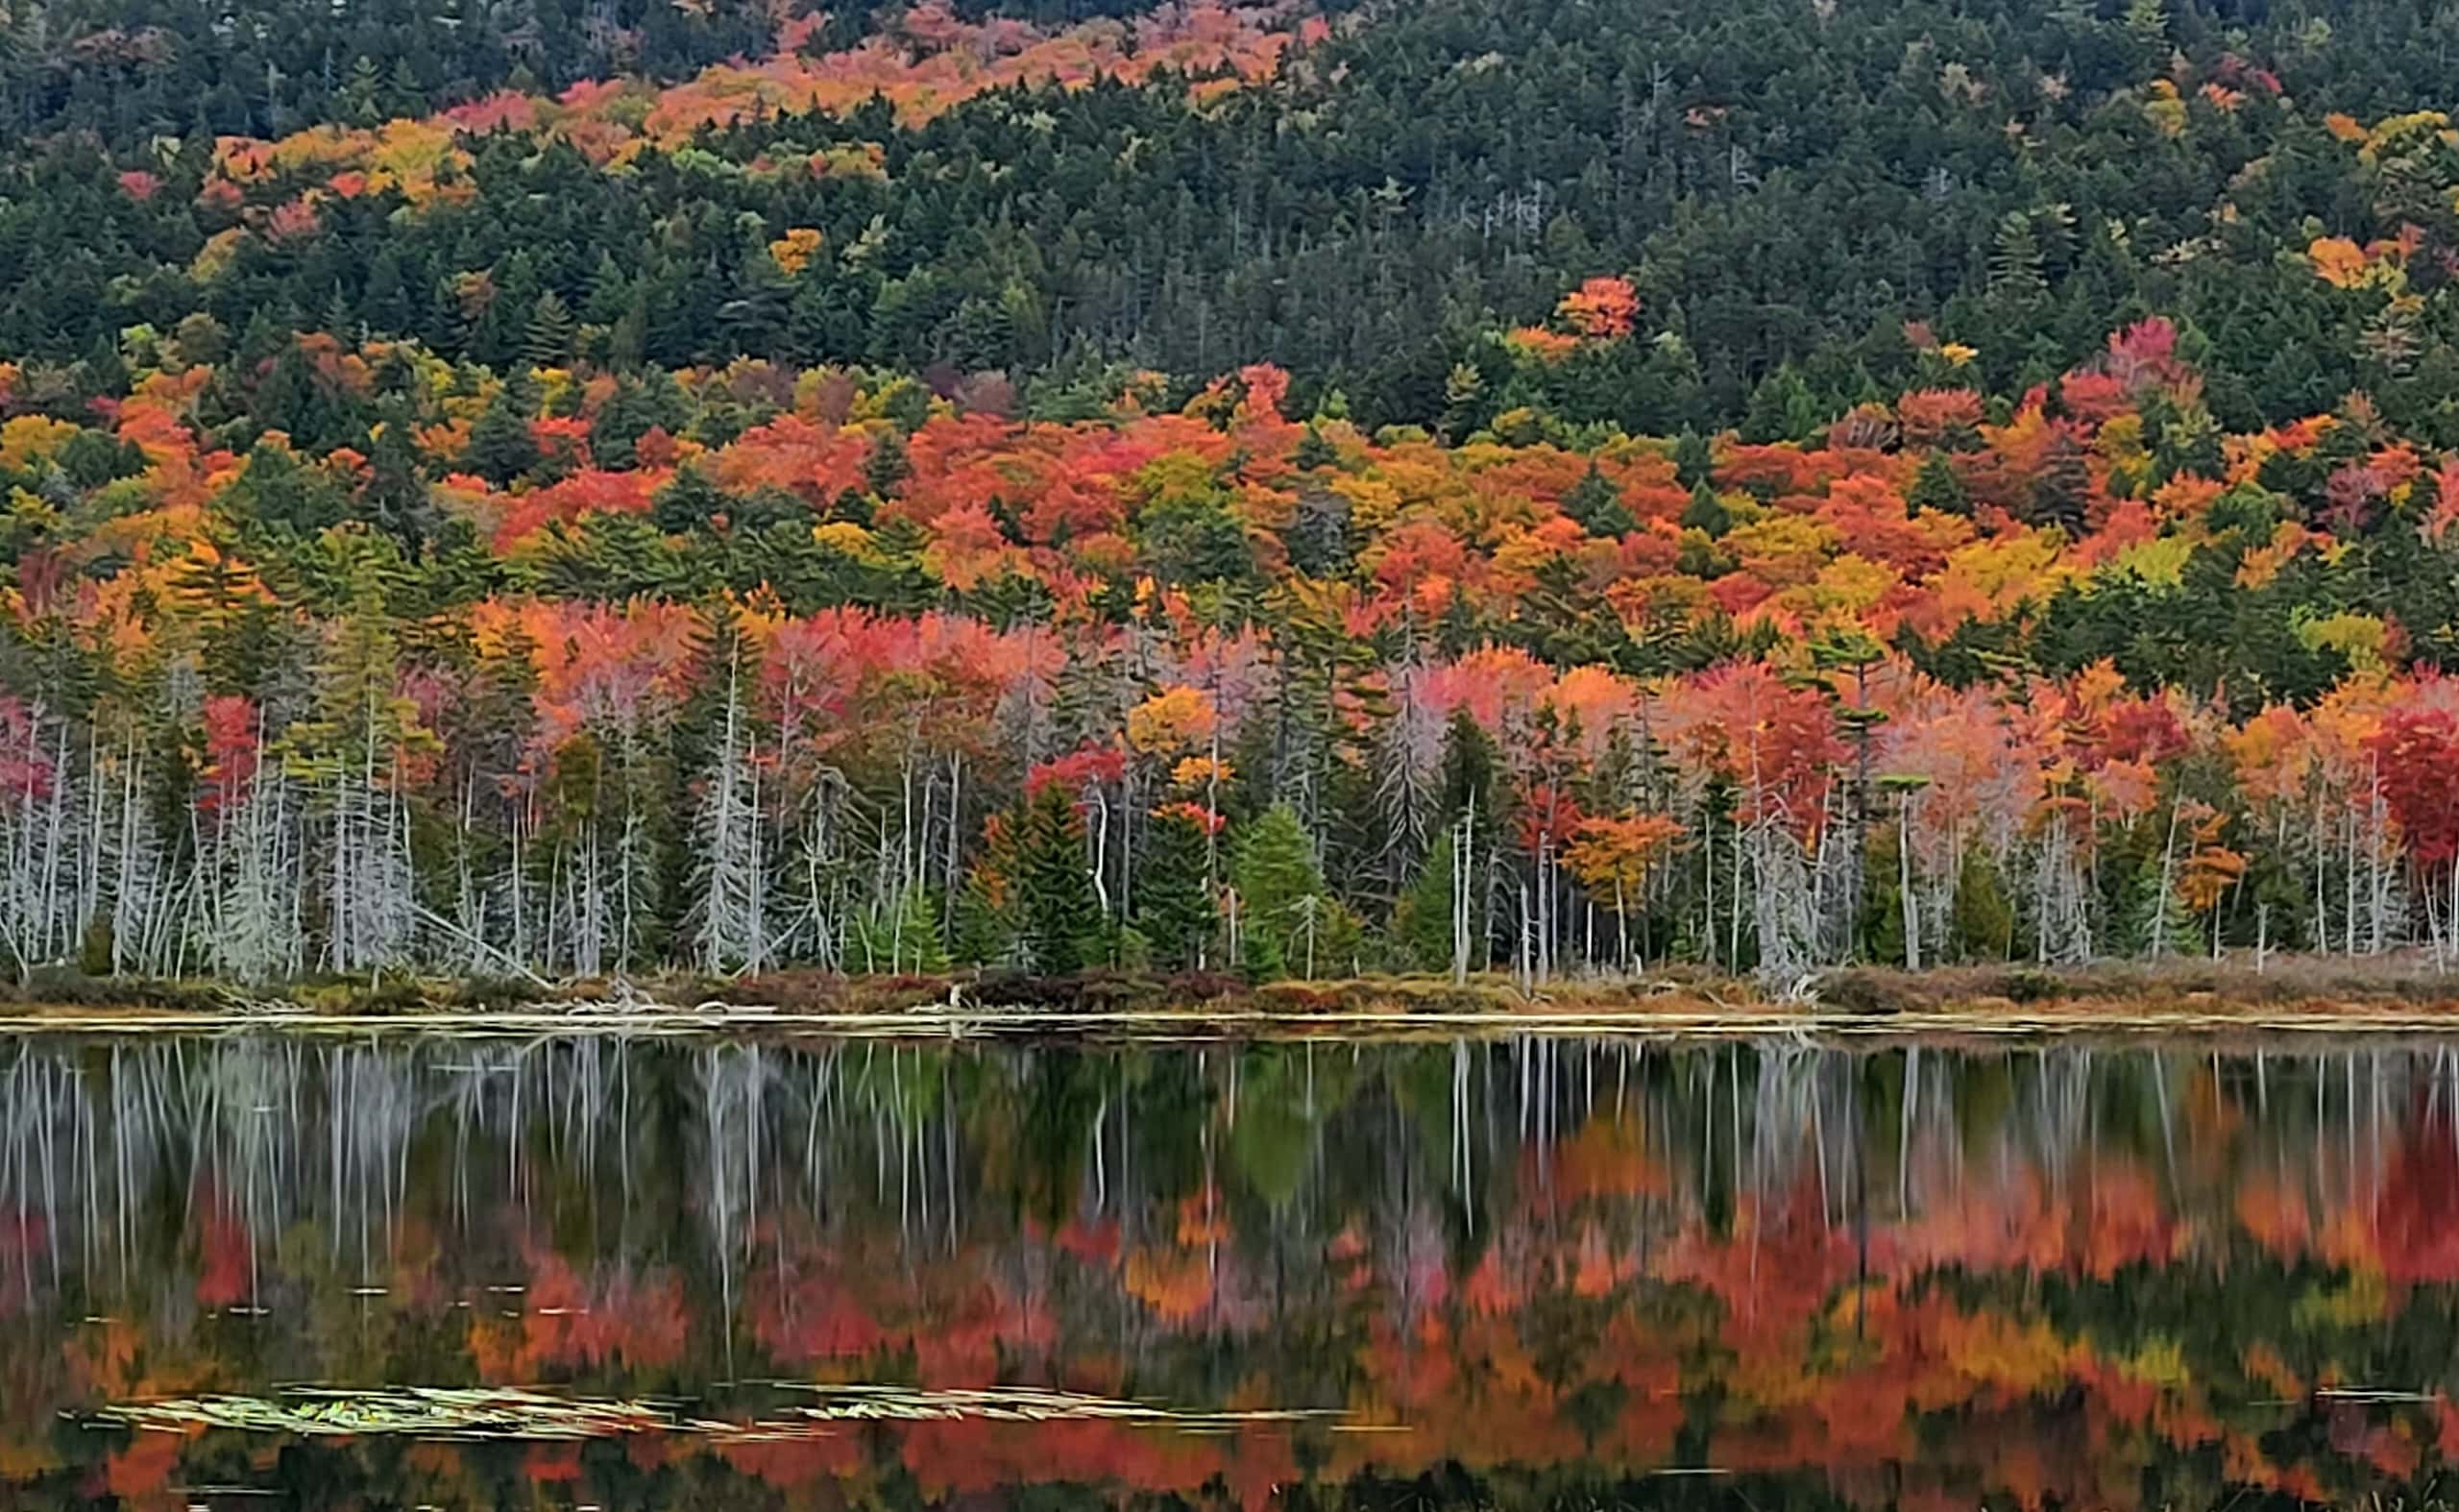 A forest reflecting its autumnal color against still lake waters, showcasing the natural beauty.